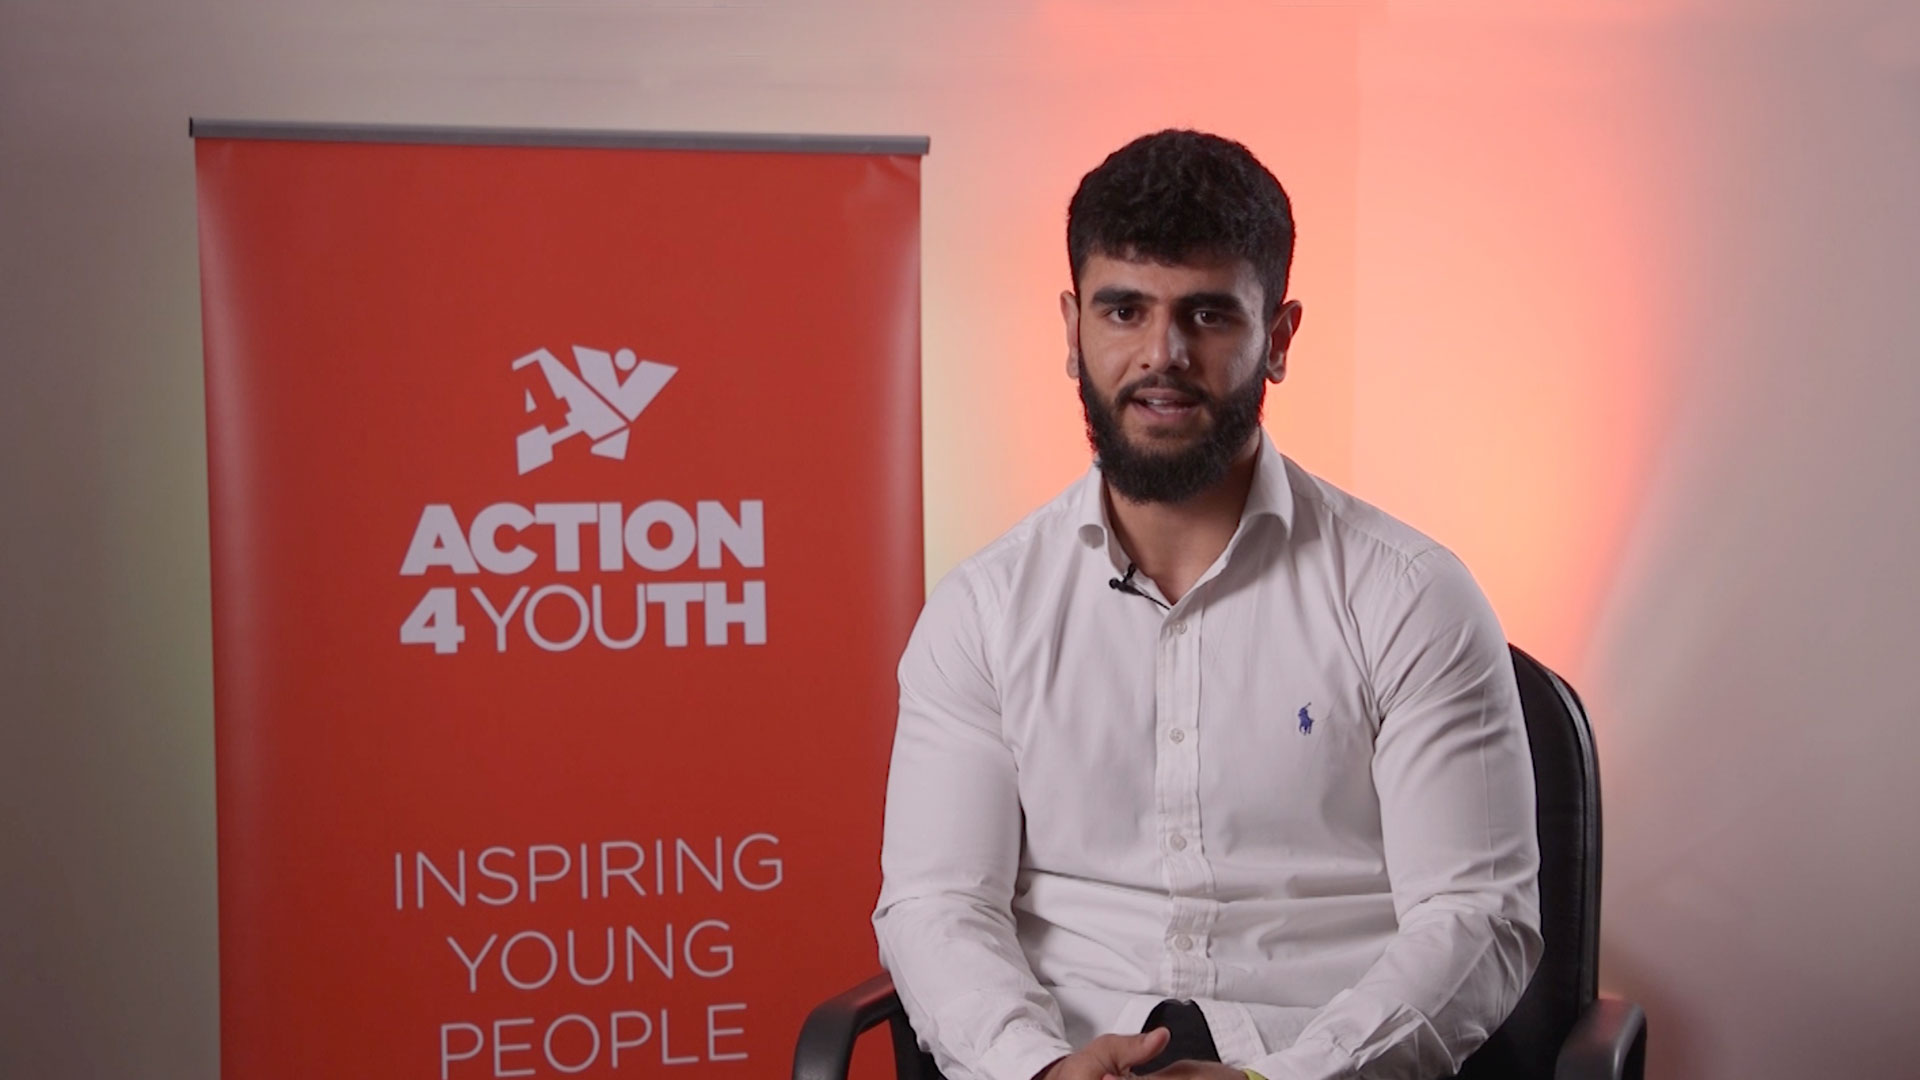 ncs programme gives confidence to speak